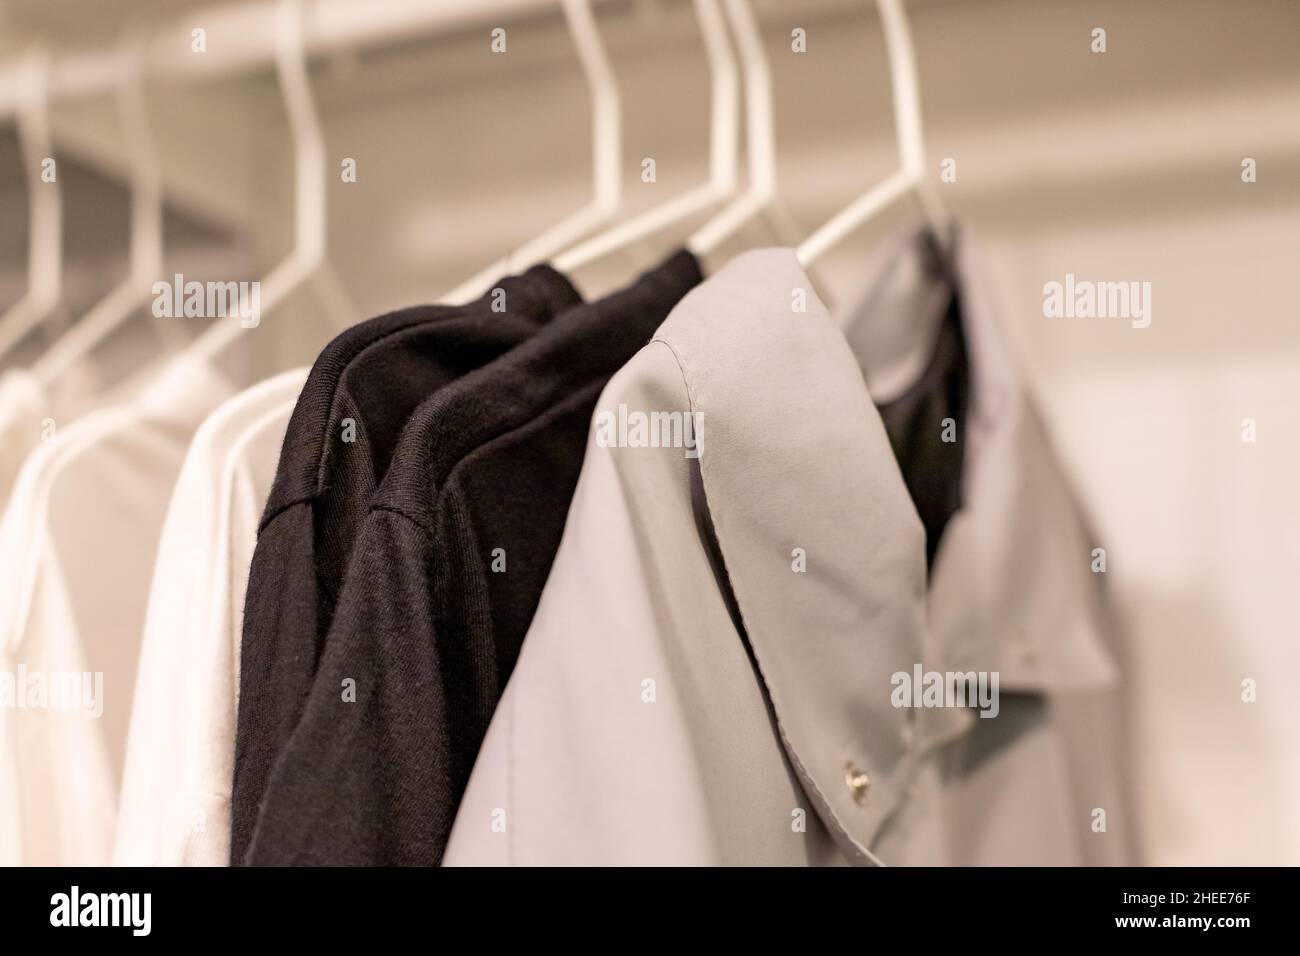 Clothes on a rail in a wardrobe. Seasonal capsule for easy dressing, order in things, cleaning out Stock Photo